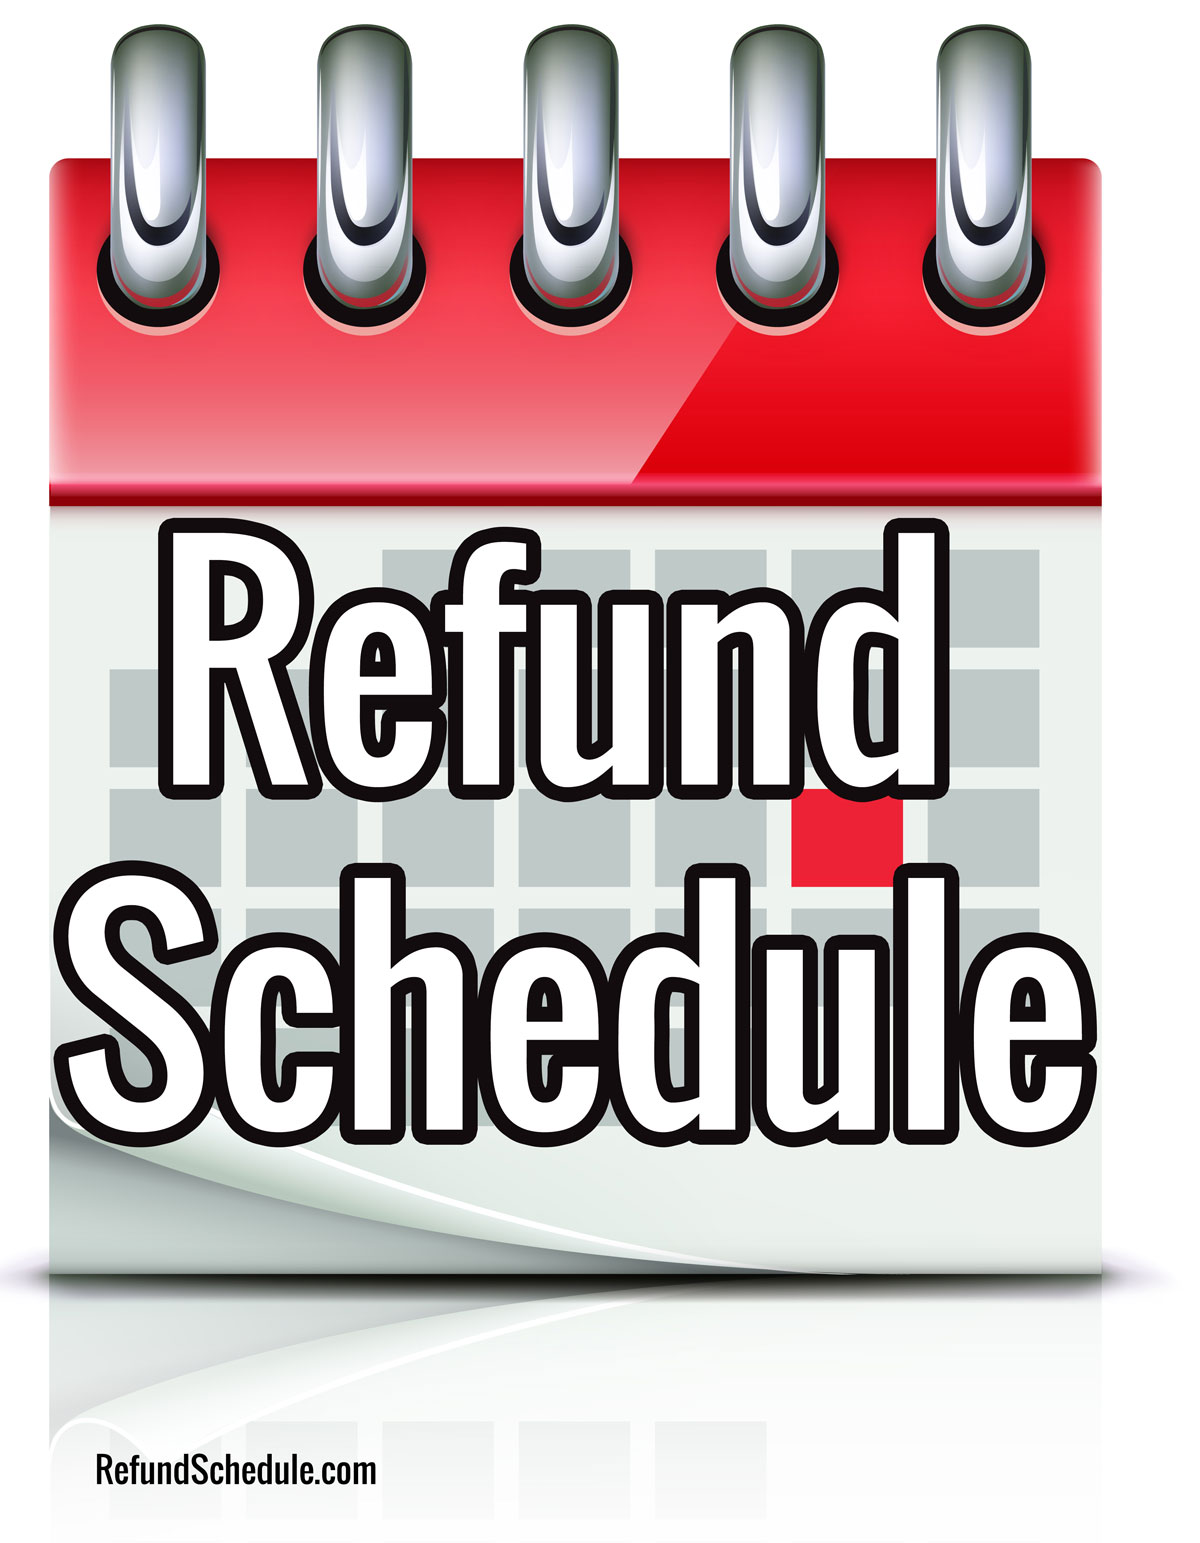 2022 IRS Refund Schedule for your 2021 Tax Return. IRS Refund Cycle